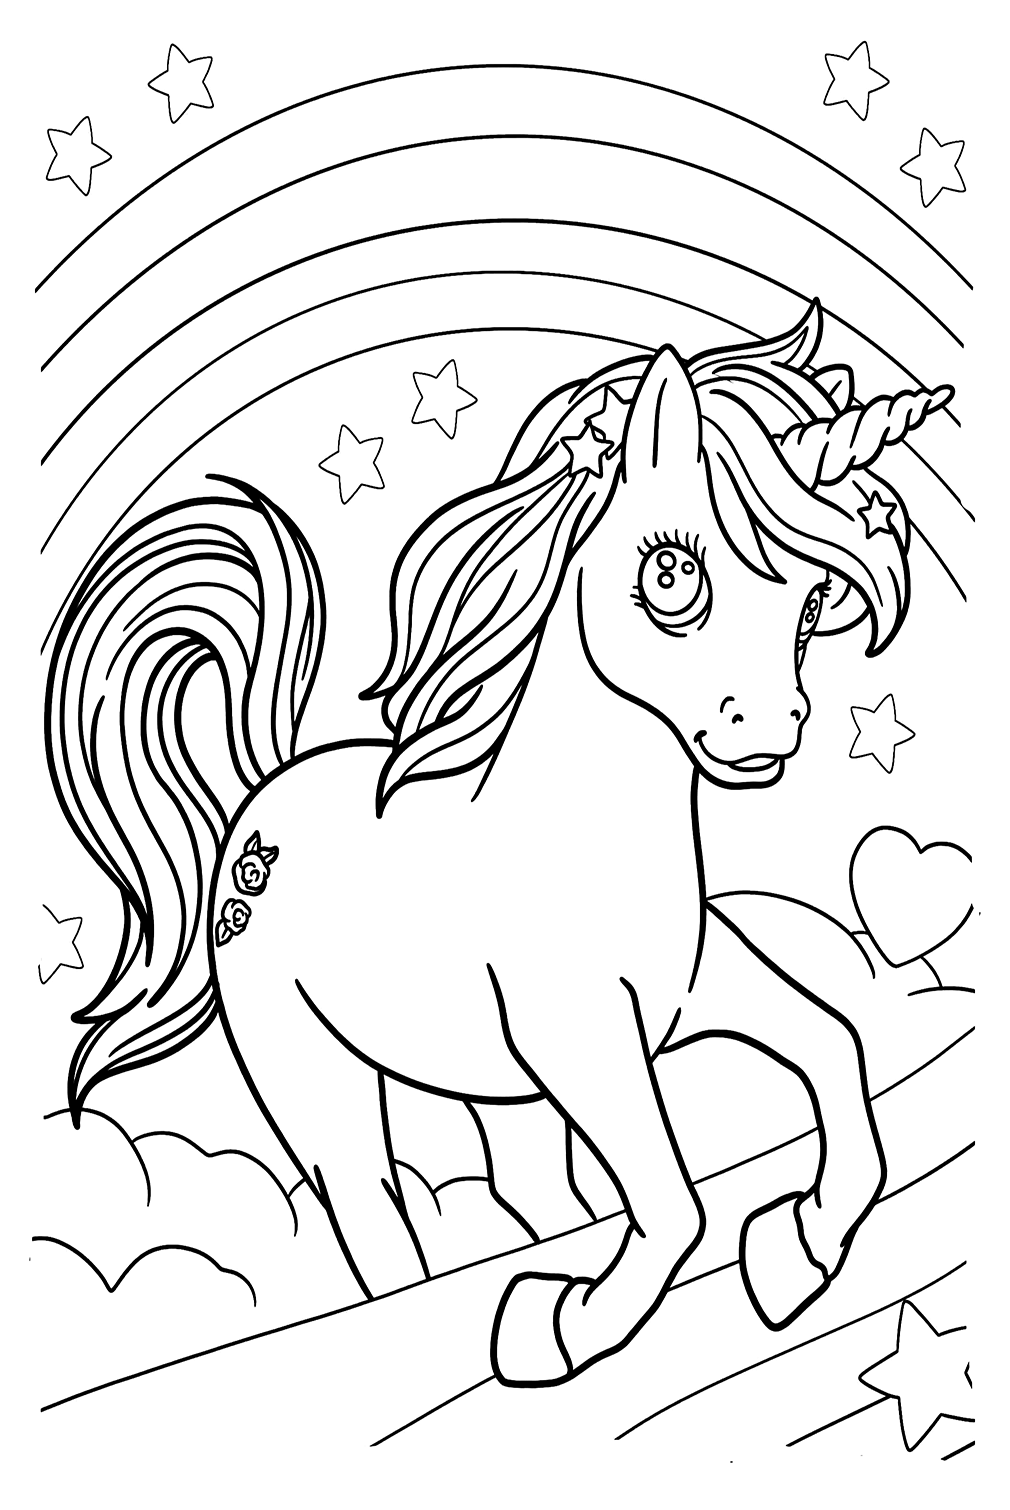 Unicorn Rainbow Coloring Pages from Unicorn